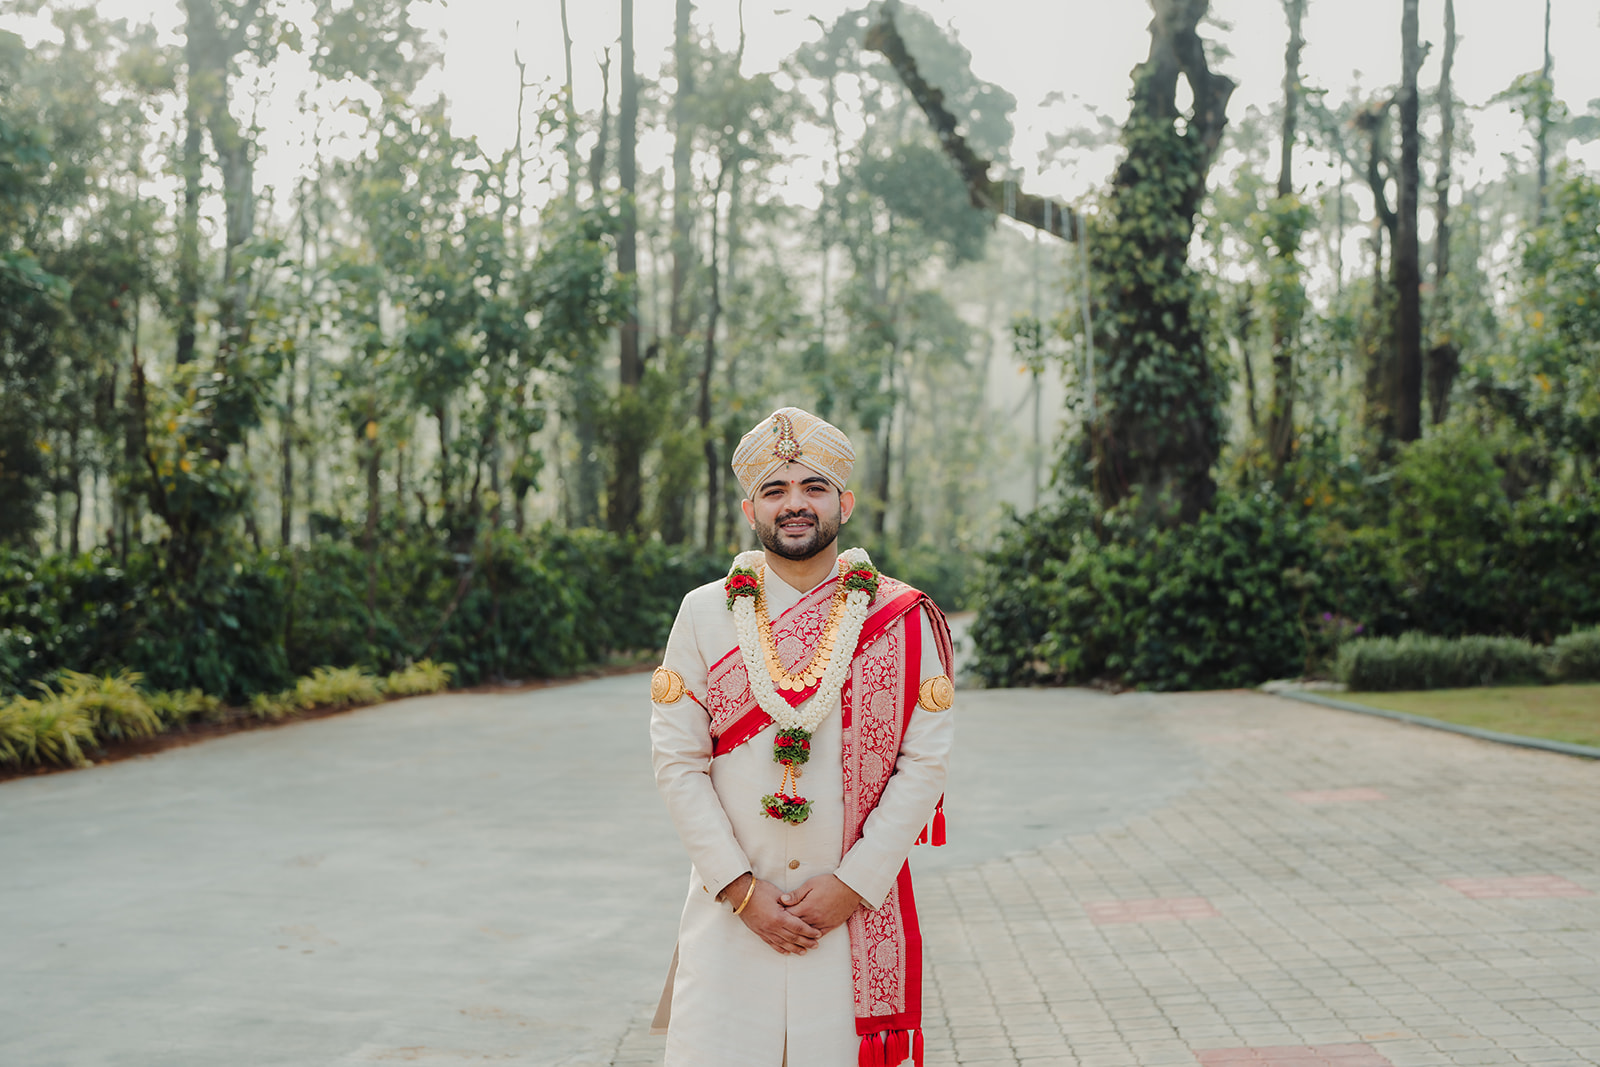 Majestic groom: The groom looks regal in his traditional wedding attire